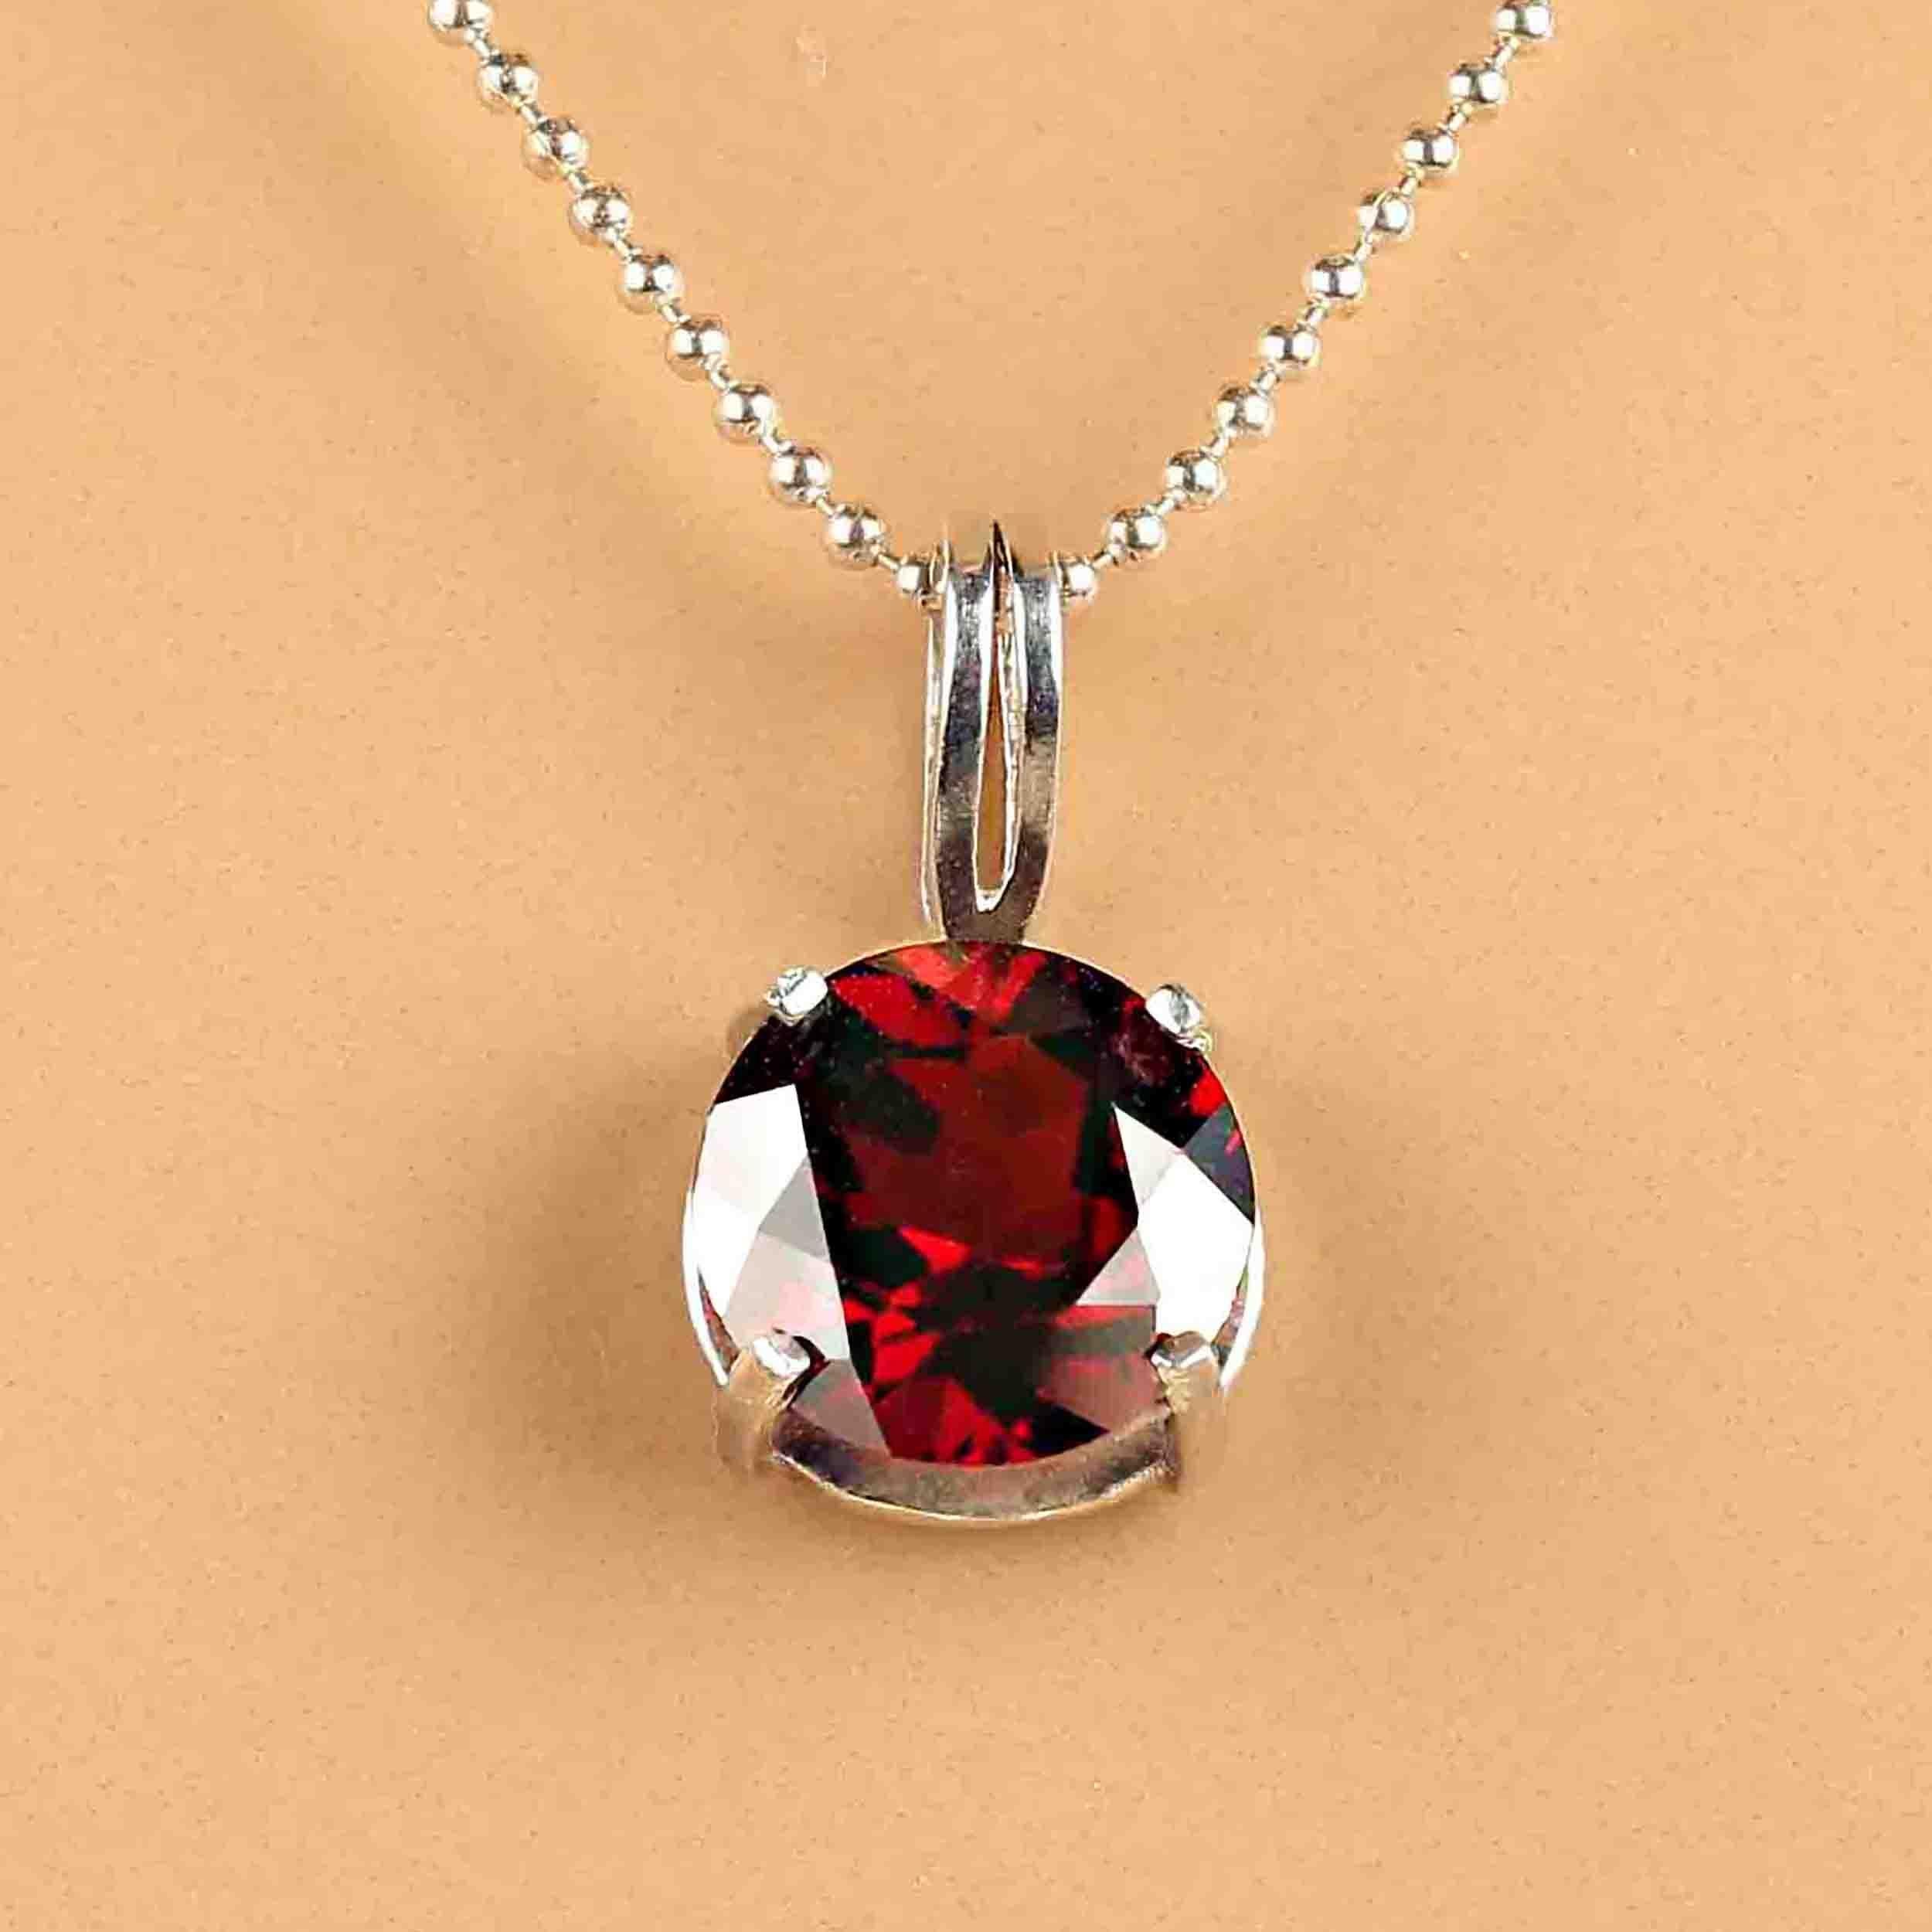 Awesome round 10MM red Garnet set in a four prong Sterling Silver setting with a nice sized bail that will accommodate your favorite chain. 3/4 inches long and 3/8 inches wide. Garnet is the January birthstone.